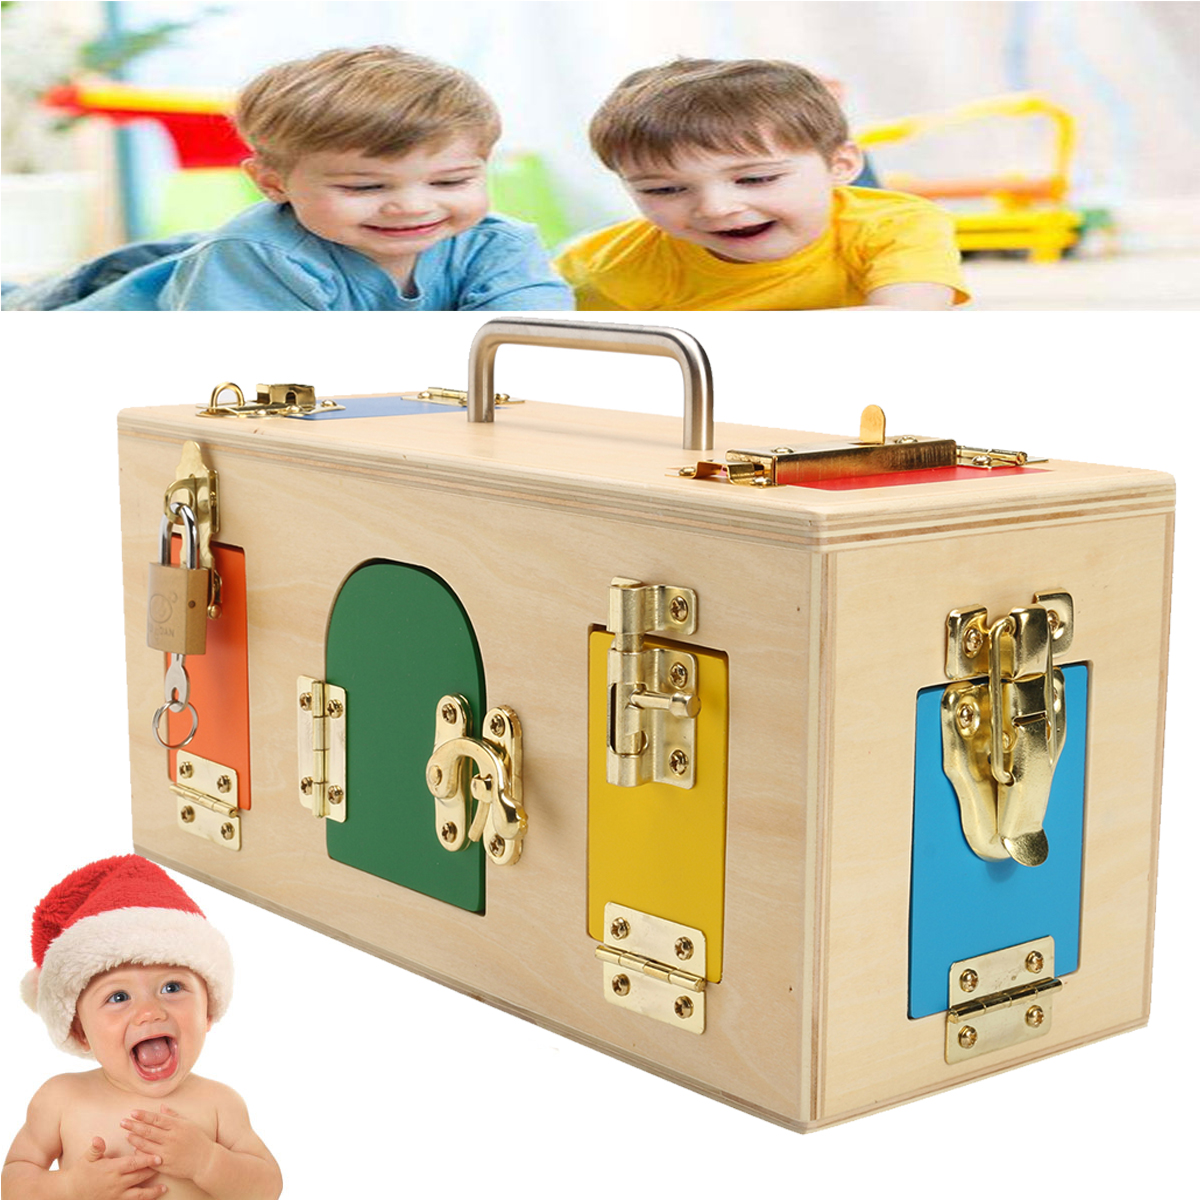 Kids-Life-Skill-Learning-Wooden-Montessori-Practical-Wood-Lock-Box-Educational-Science-Toys-1392942-1